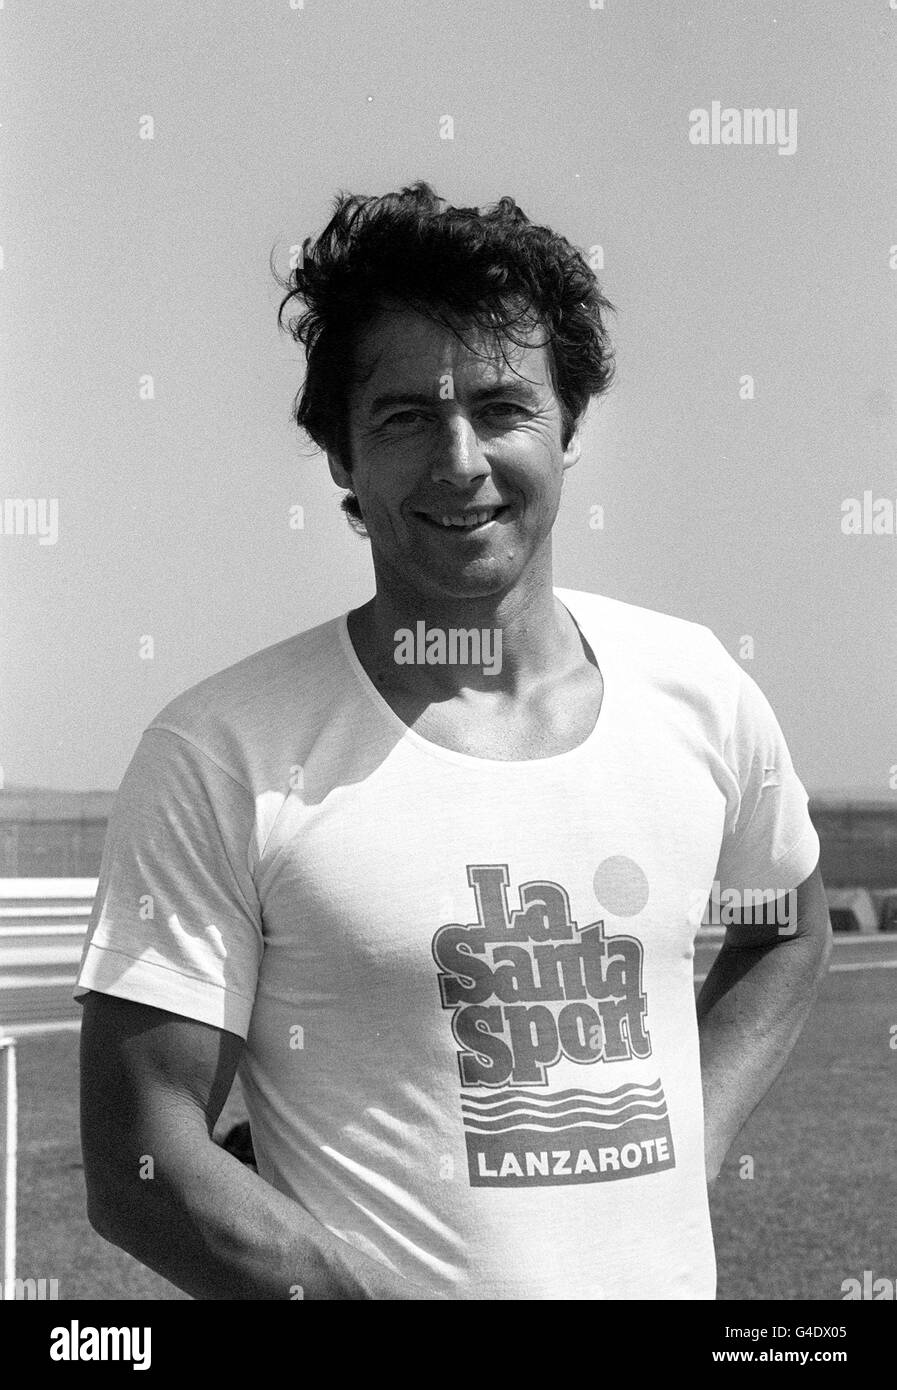 PA NEWS PHOTO 30/5/84 WELSHMAN LYNN DAVIES, 1964 OLYMPIC LONG JUMP CHAMPION GOLD MEDALIST IN LANZAROTE, WHERE THE OLYMPIC SQUAD TRAINED Stock Photo